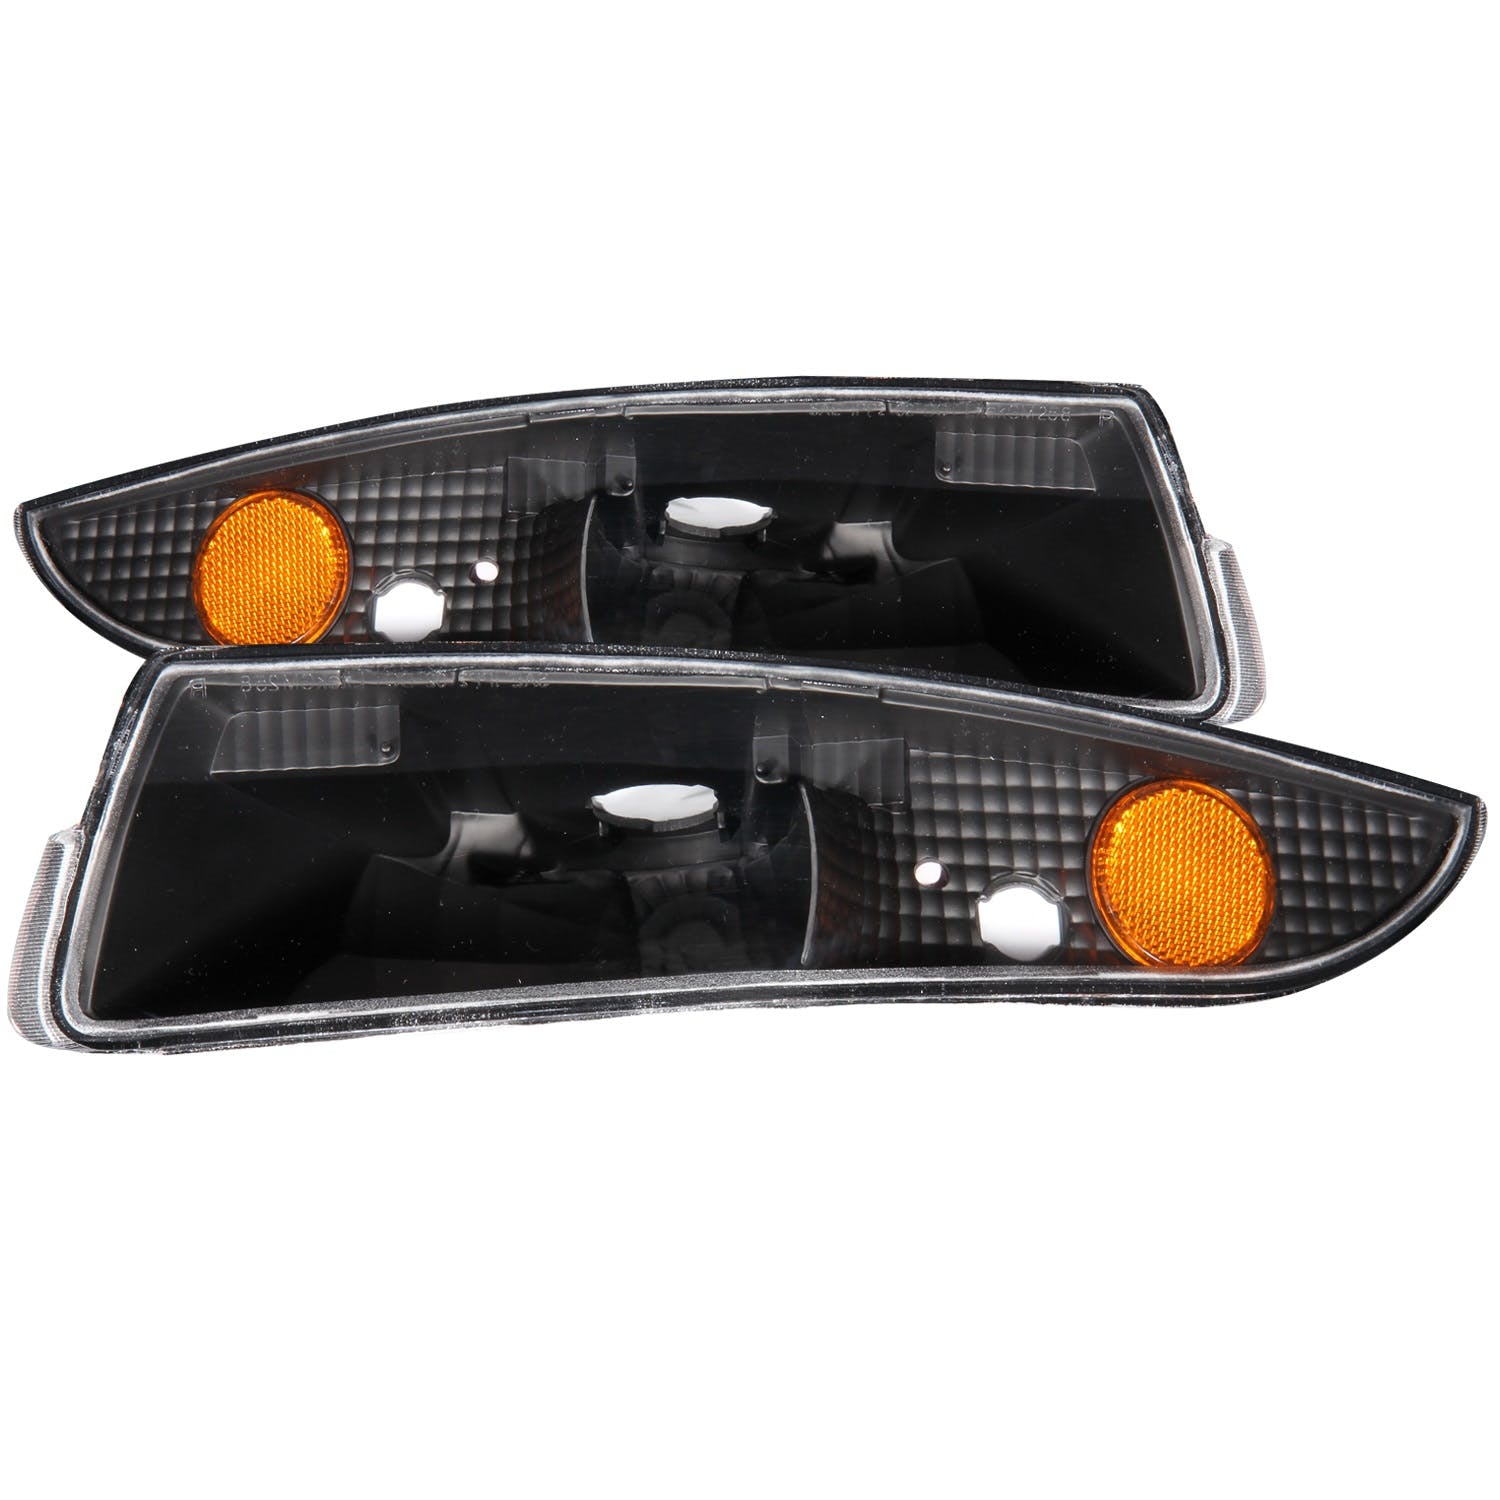 AnzoUSA 511045 Euro Parking Lights Black with Amber Reflector